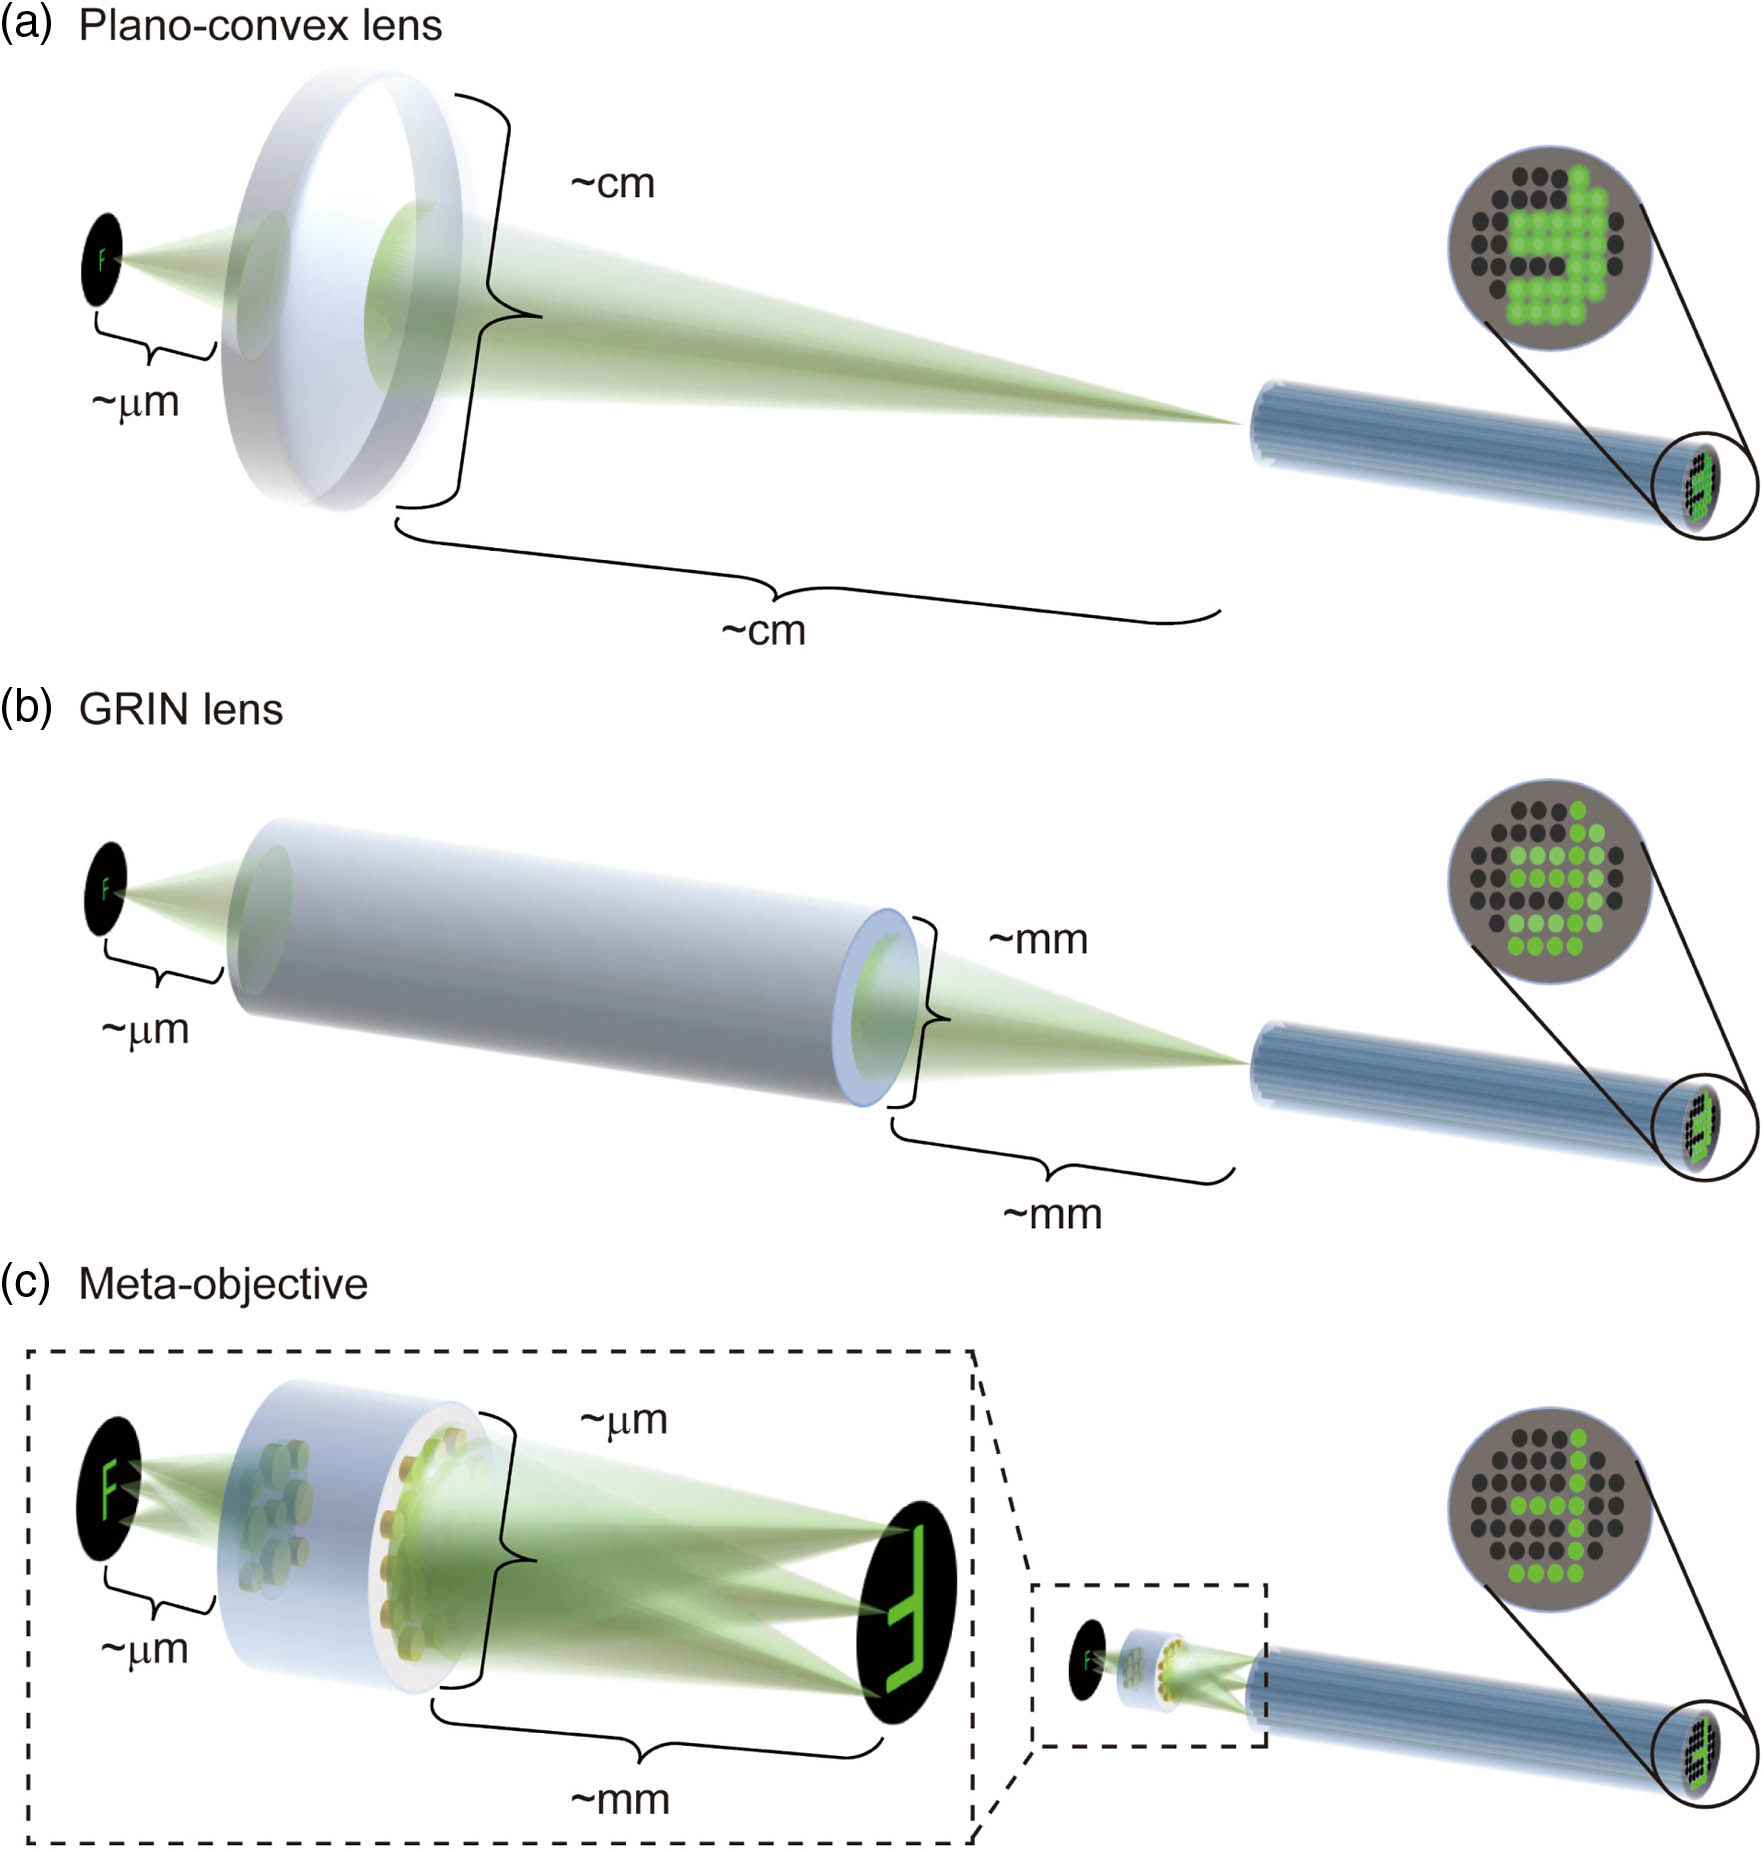 Schematics of microscope objectives for fiber bundle microendoscopes with different sizes and image qualities. (a) Plano–convex lens-based probe with centimeter diameter. (b) Graded index (GRIN) lens-based probe with millimeter diameter. (c) Probe based on the meta-objective with micrometer diameter, greatly reducing the size of the probe compared with (a) plano–convex lenses and (b) GRIN lenses. The dotted line enlarged section in (c) illustrates that meta-objective can eliminate monochromatic aberrations in full field of view (FOV) of both on- and off-axis, while the plano–convex lens and GRIN lens can only achieve on-axis aberration correction. The solid line magnified parts (rightmost) show the images transmitted through fiber bundles. Obviously, the use of the metalens-based objective produces aberration-free pictures.